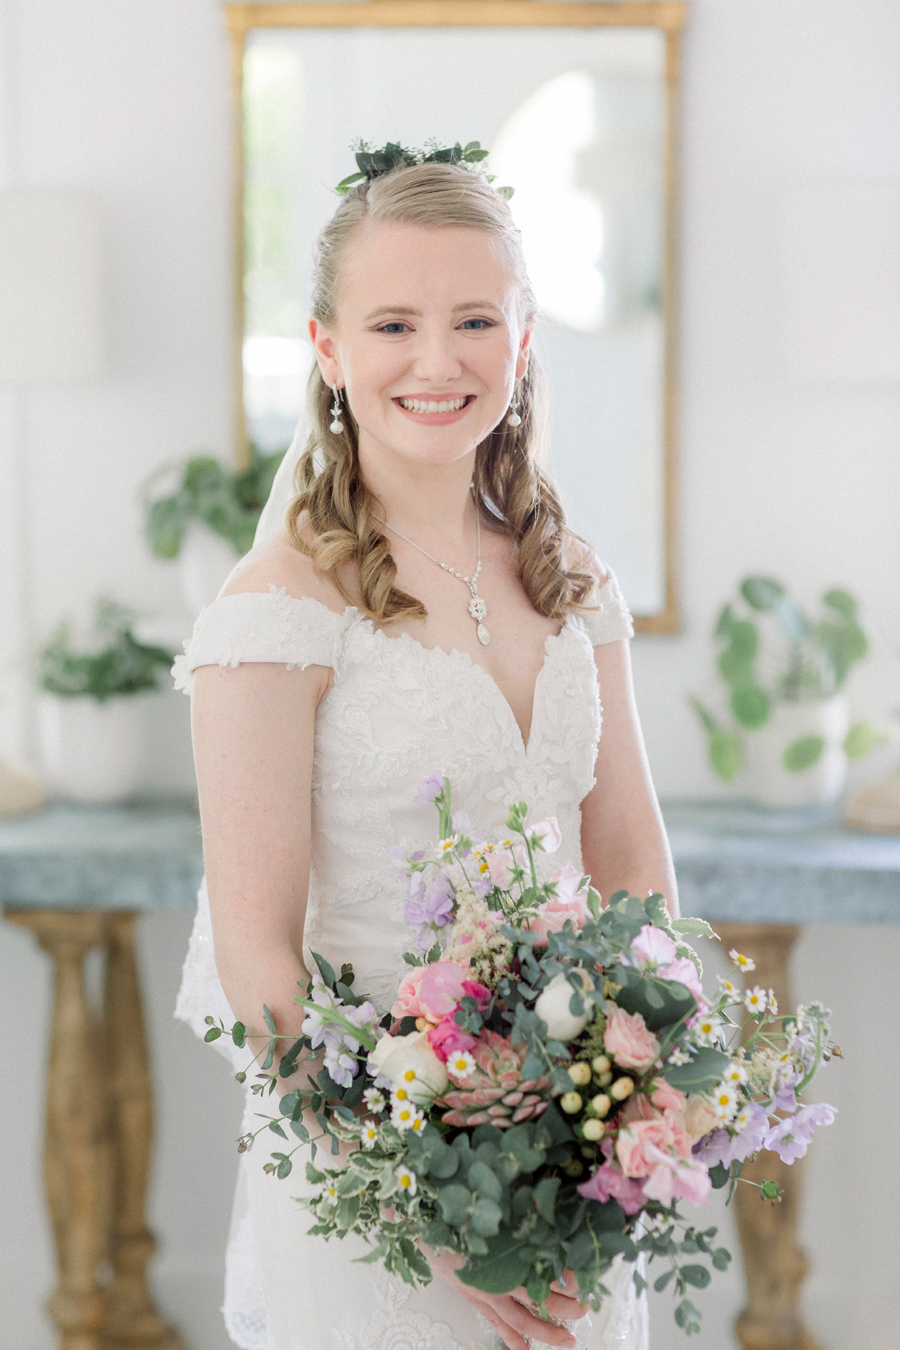 A bride poses for a portrait in the bridal cottage at a Blue Bell Farm wedding by Love Tree Studios.